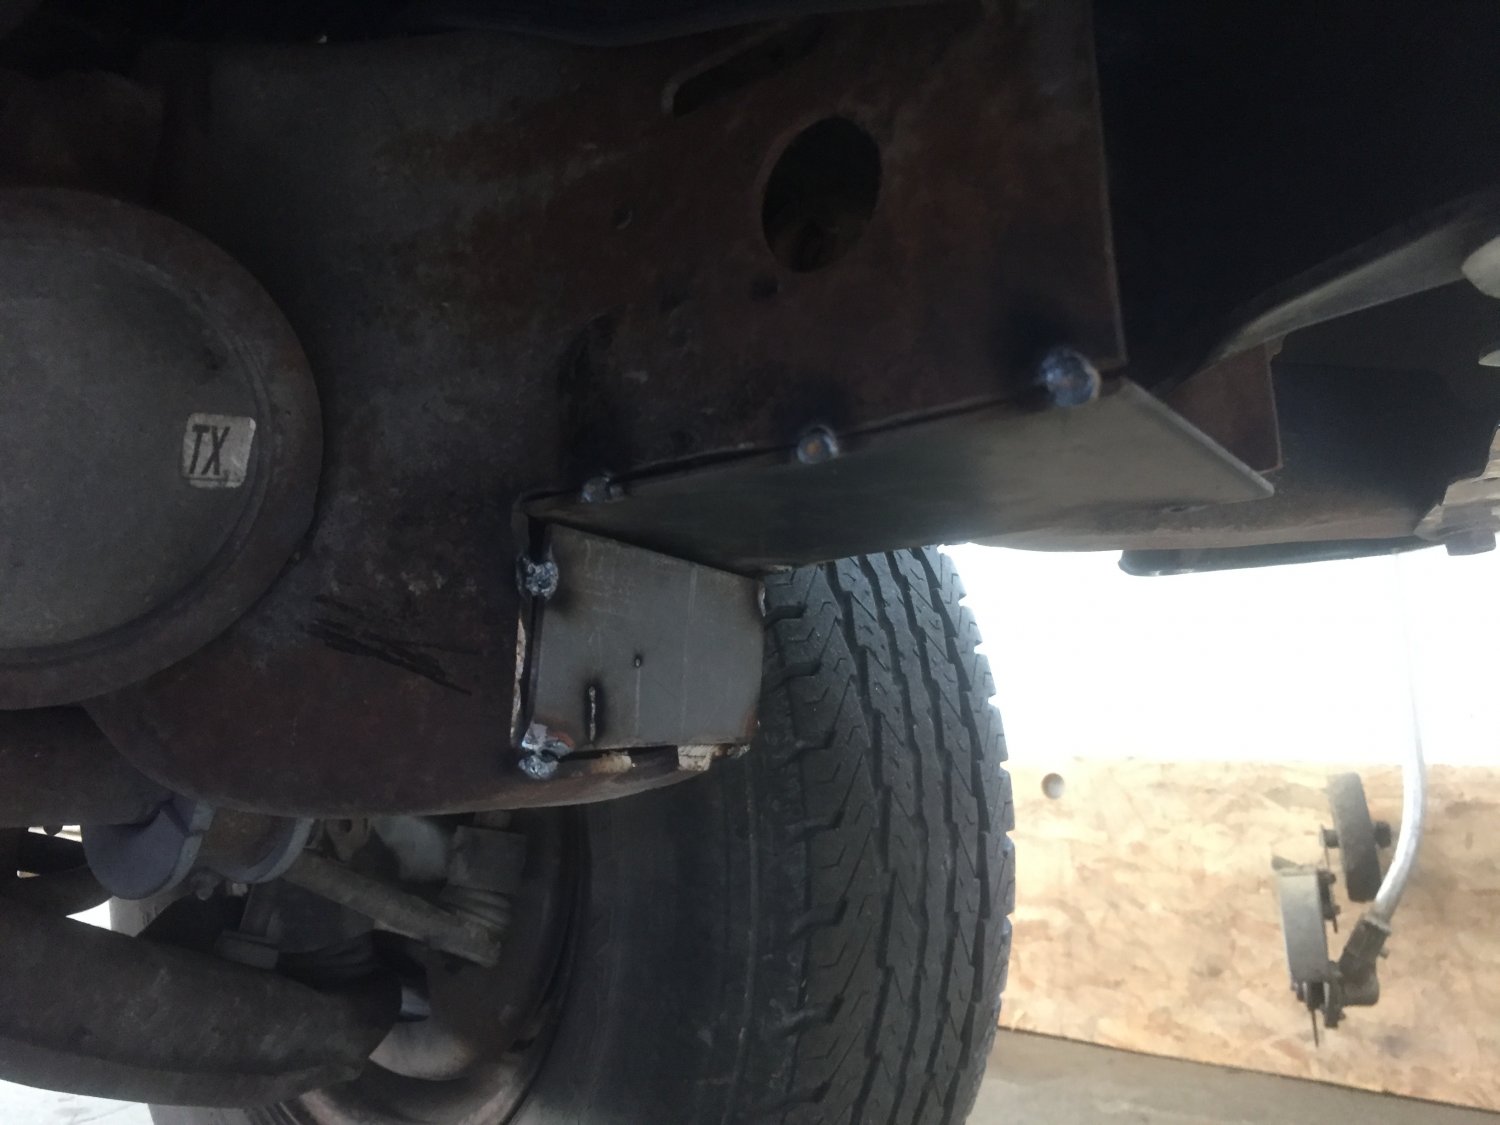 Chevy solid axle swap shackle hangers. 